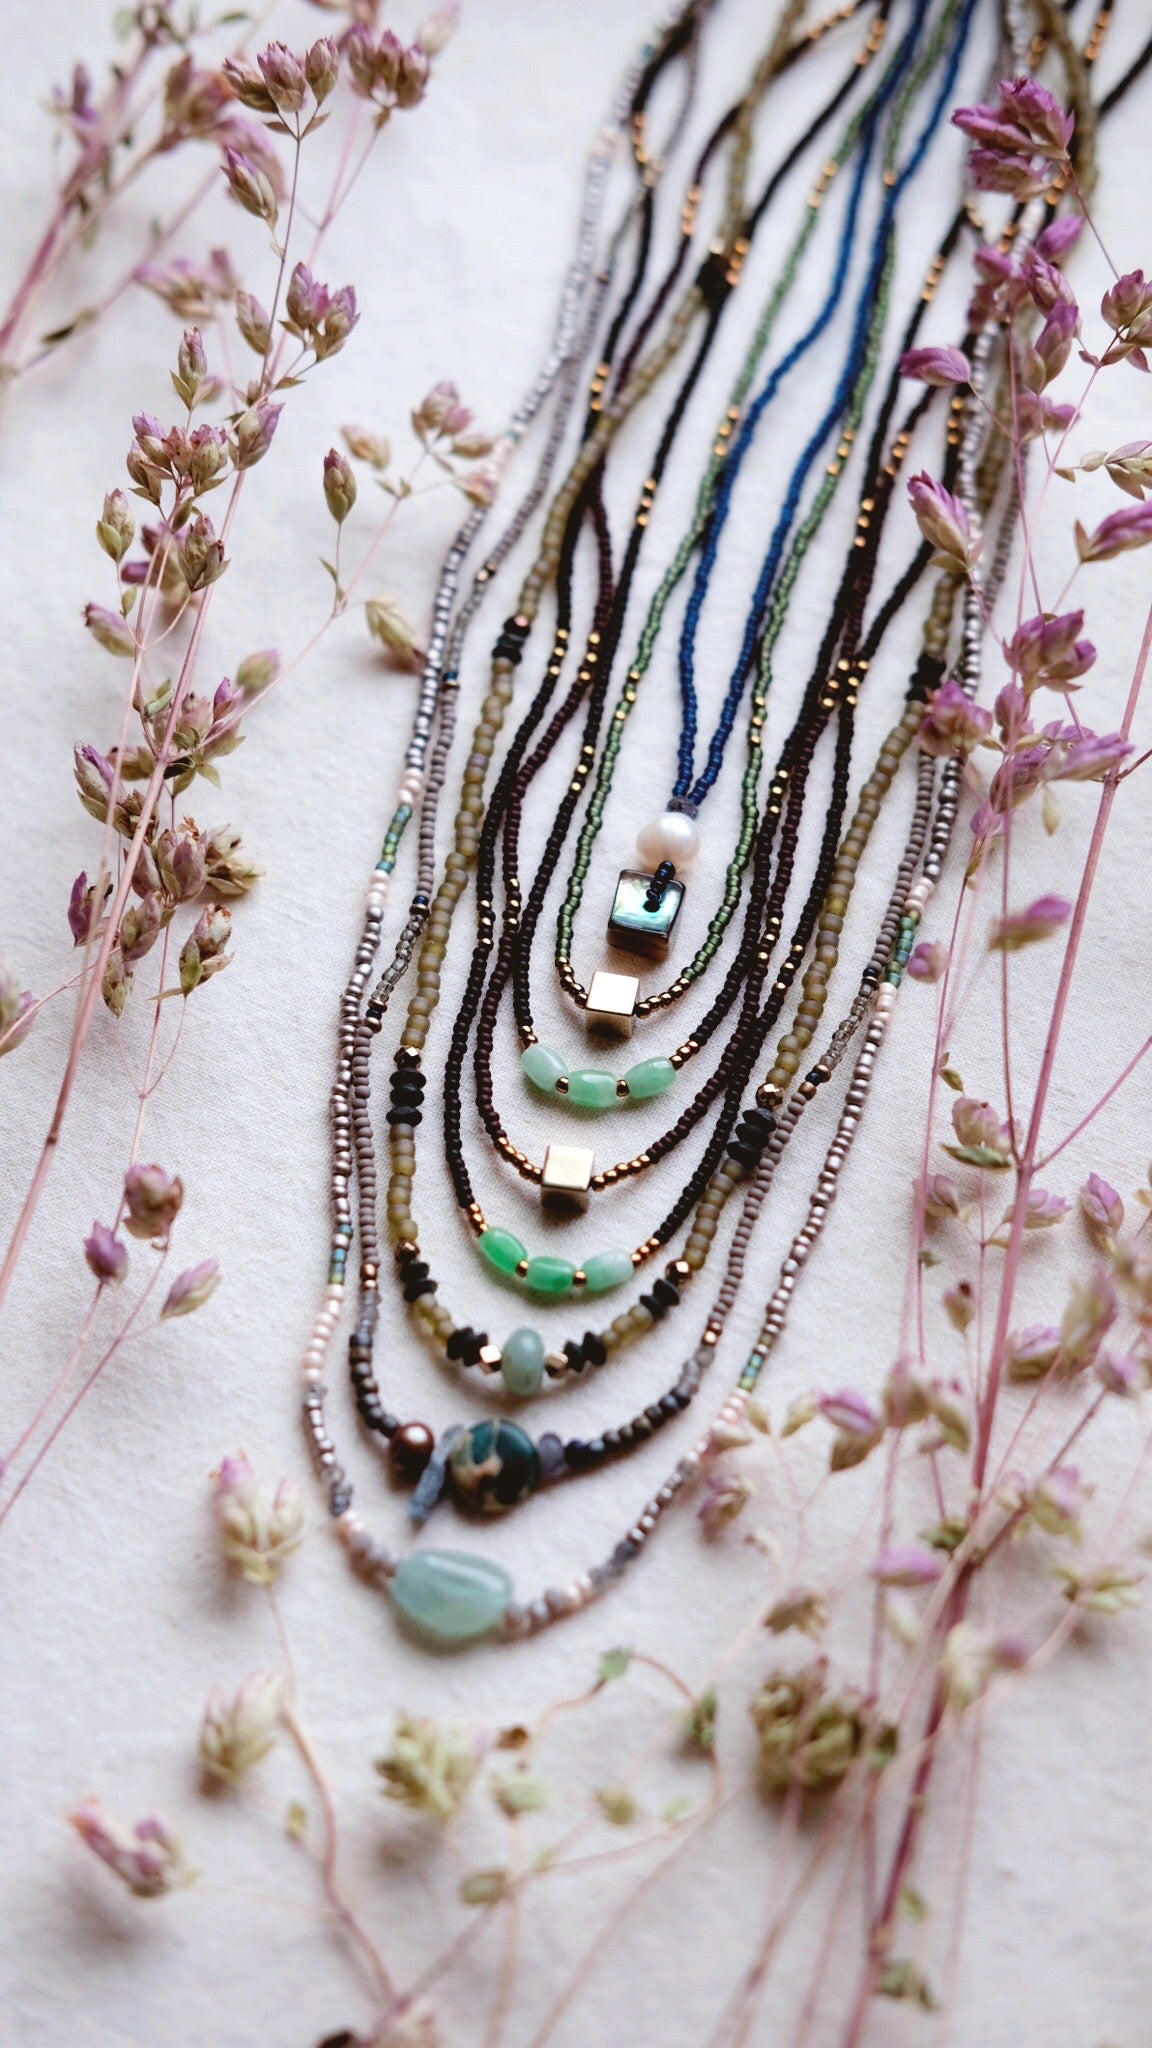 Moon Pearl + Baroque Pearl + Indigenous Abalone + Labradorite necklace